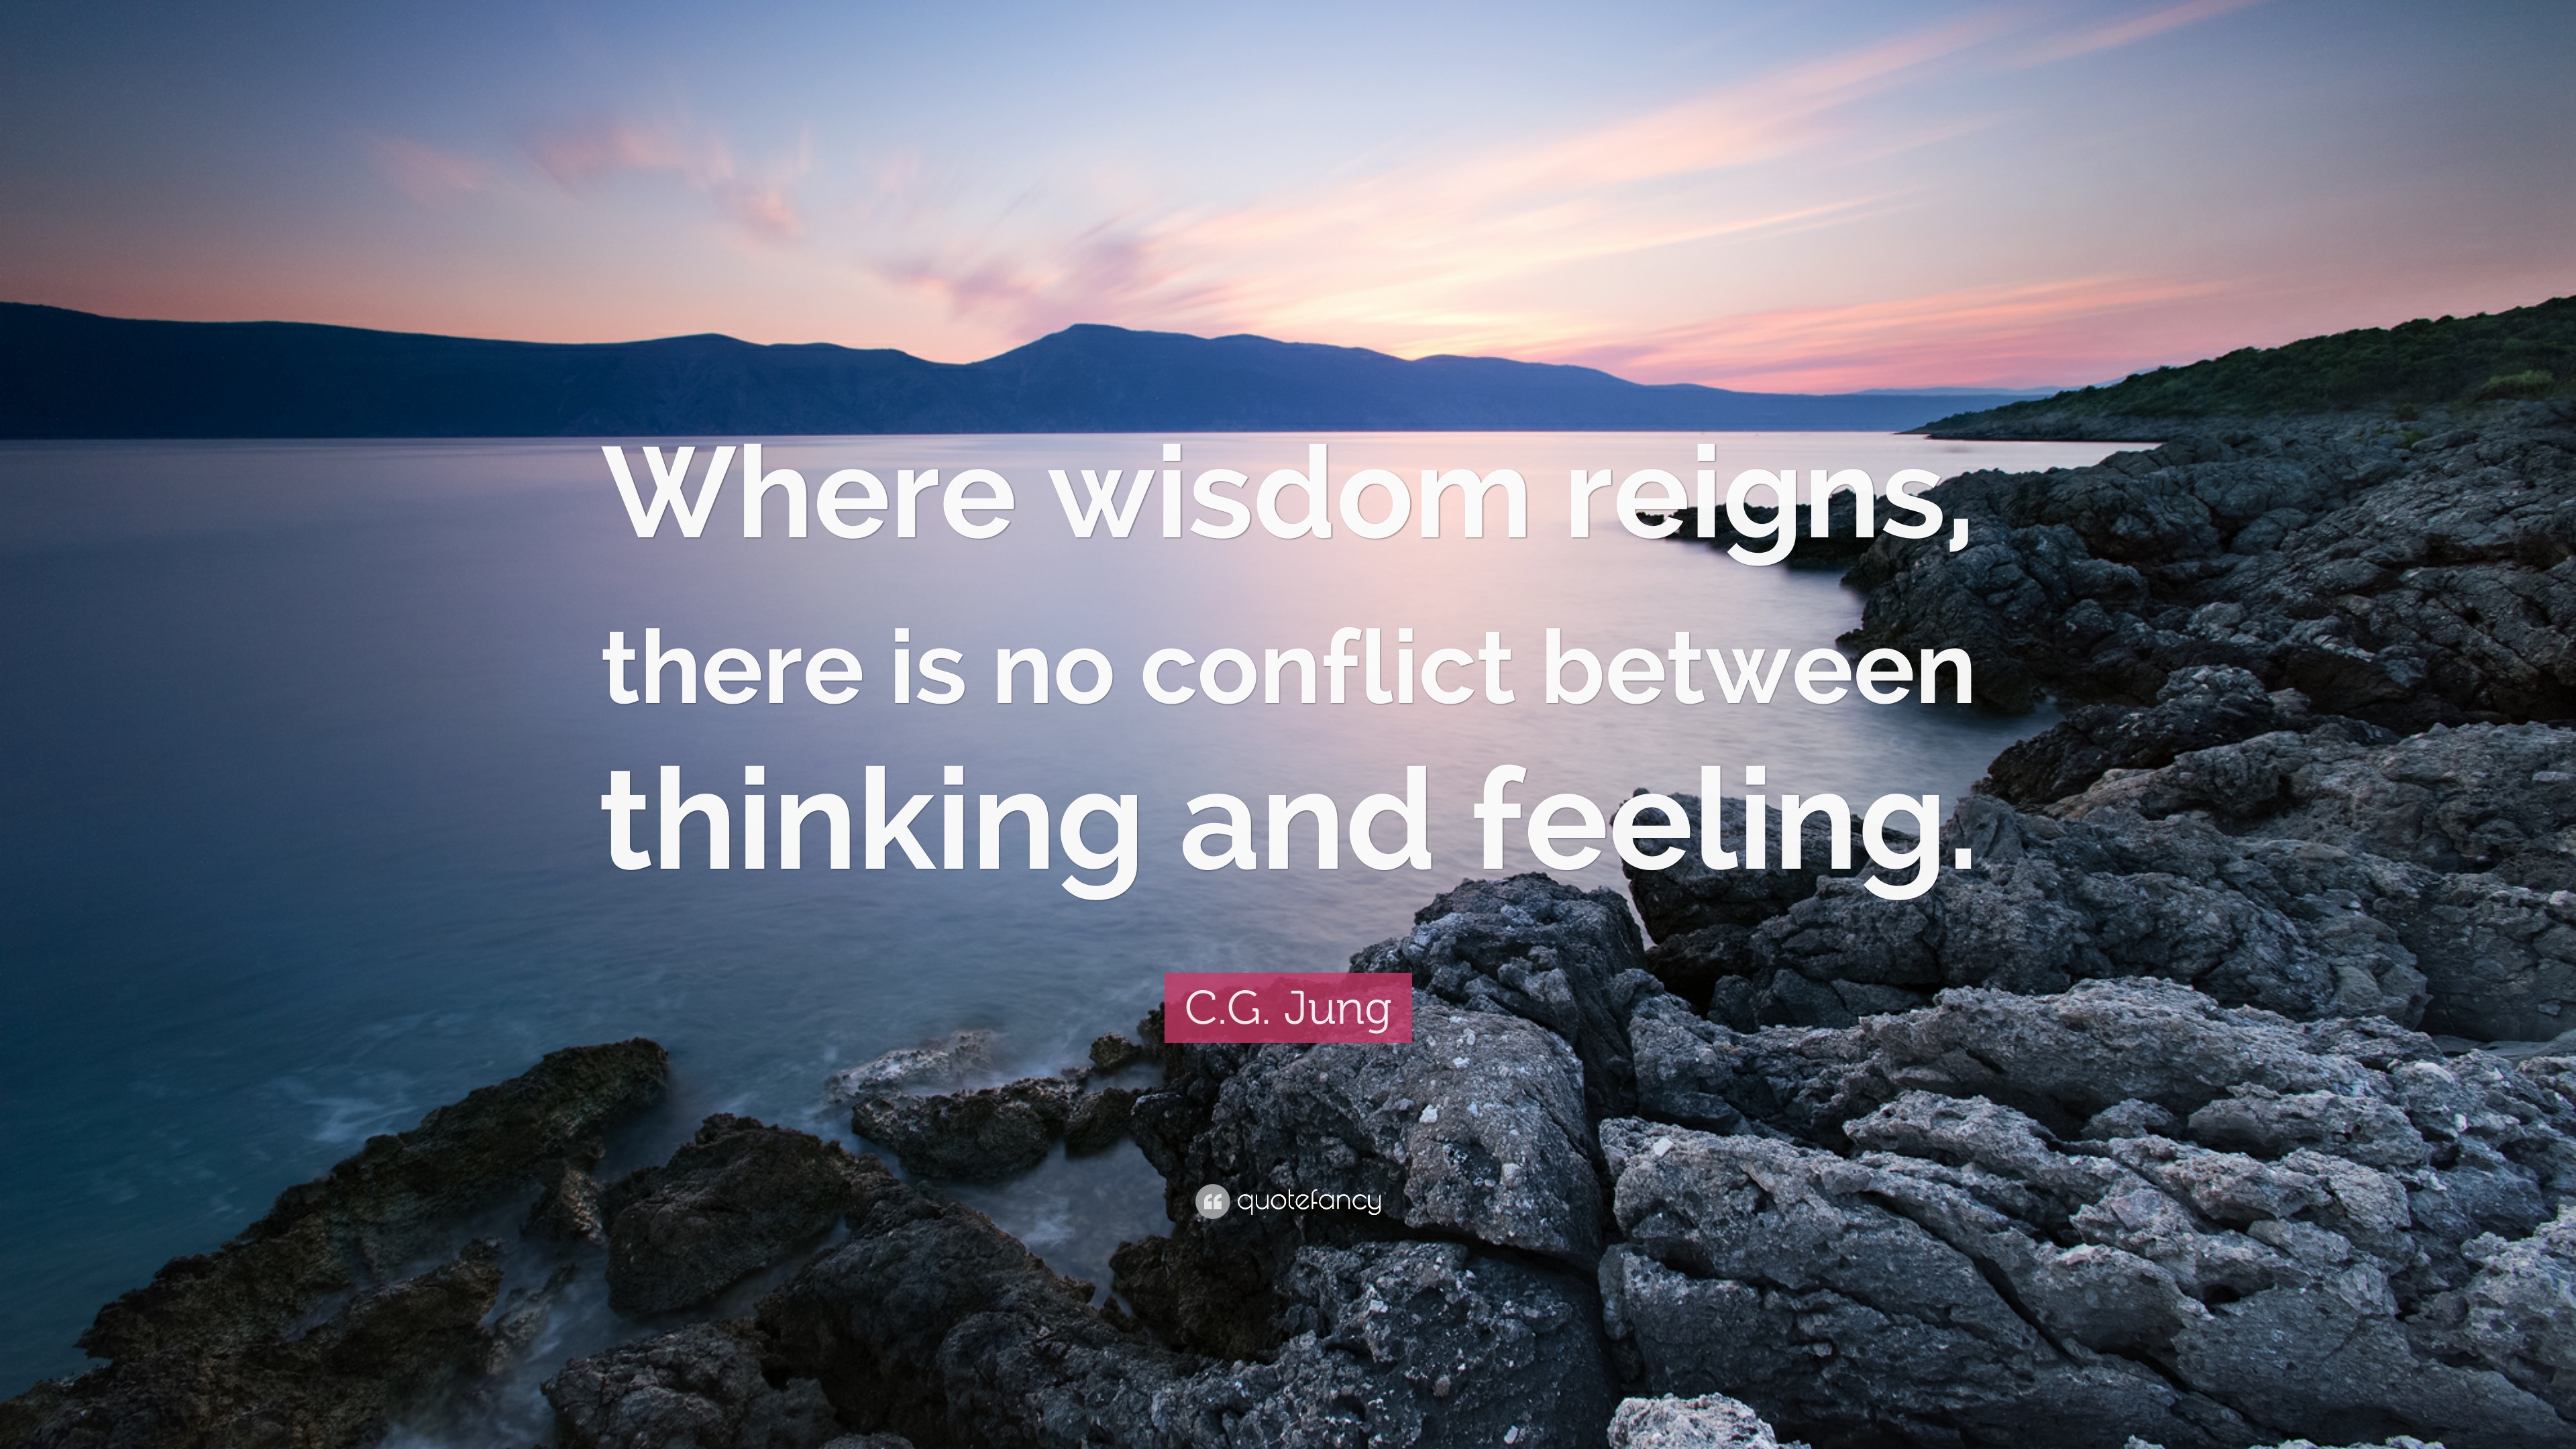 C G Jung Quote “where Wisdom Reigns There Is No Conflict Between Thinking And Feeling ”